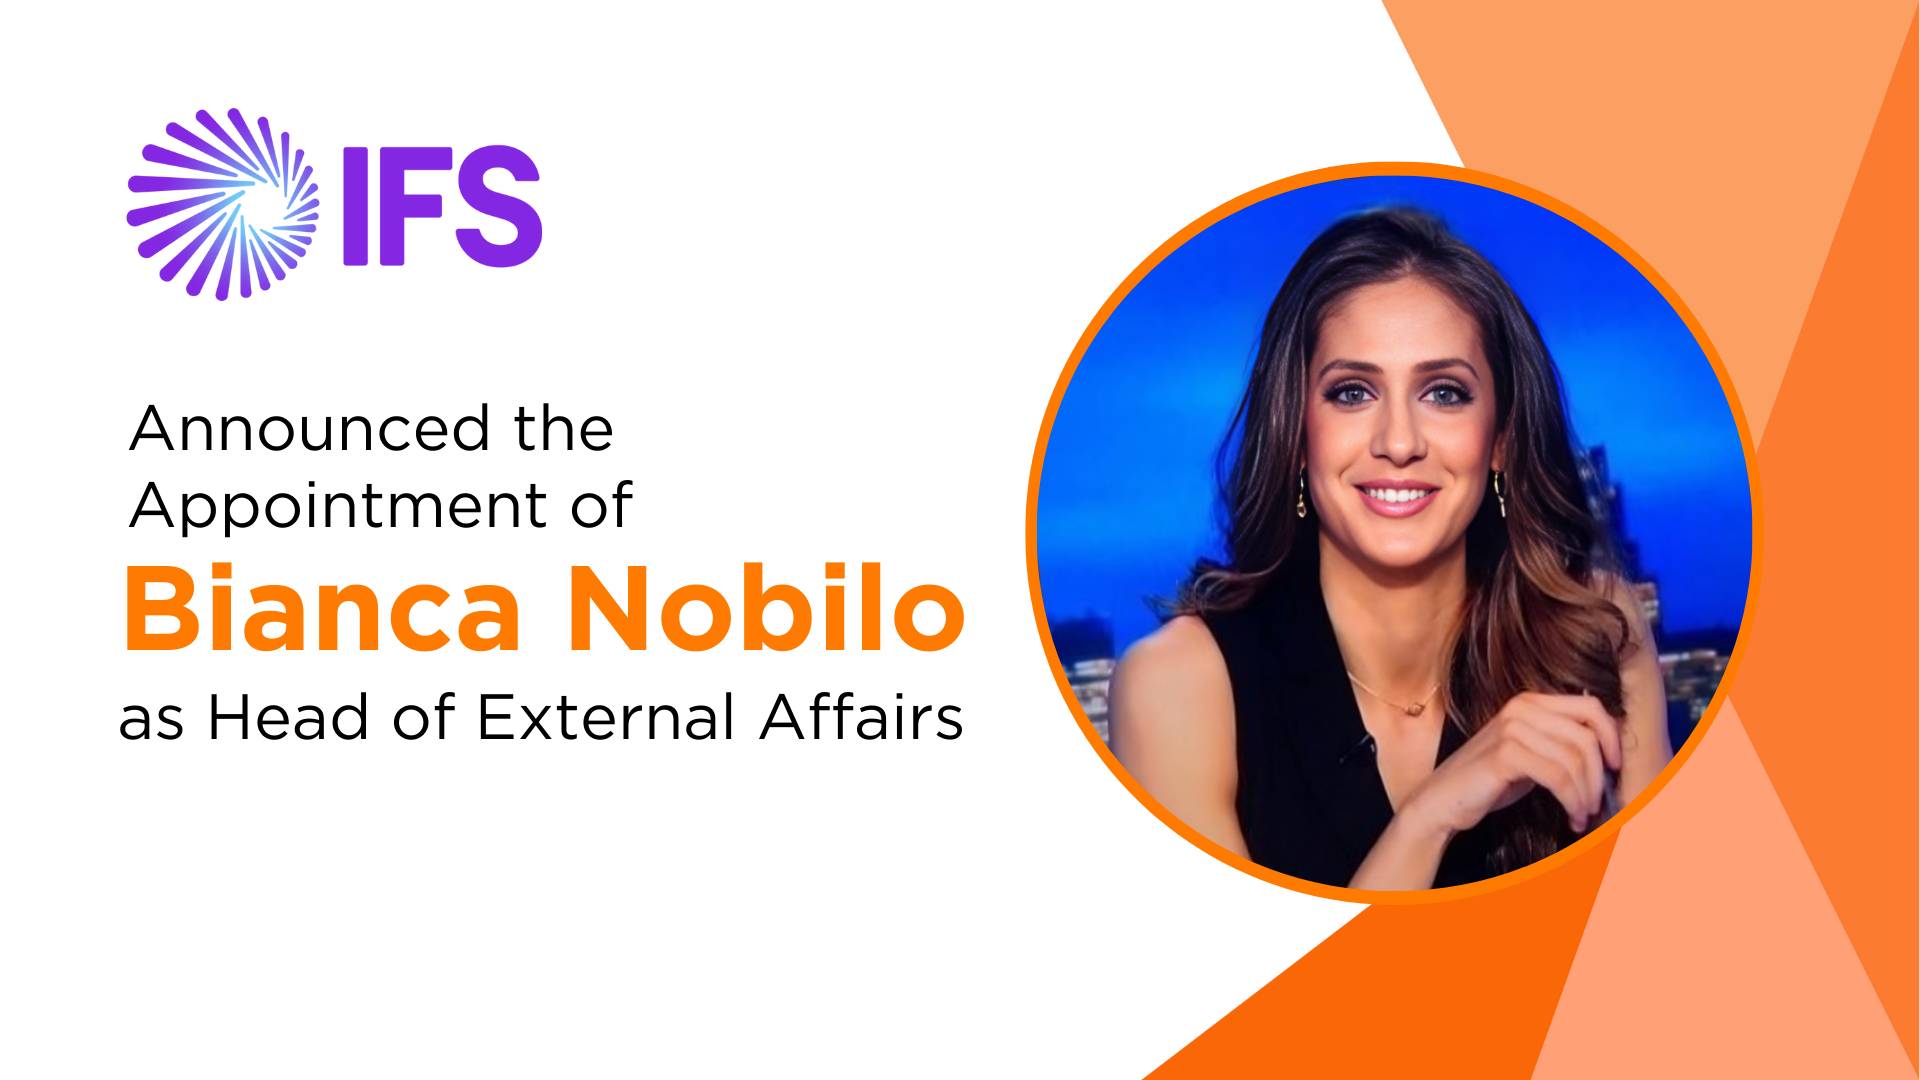 Bianca Nobilo Appointed Head of External Affairs at IFS: Driving Growth and Industry Influence